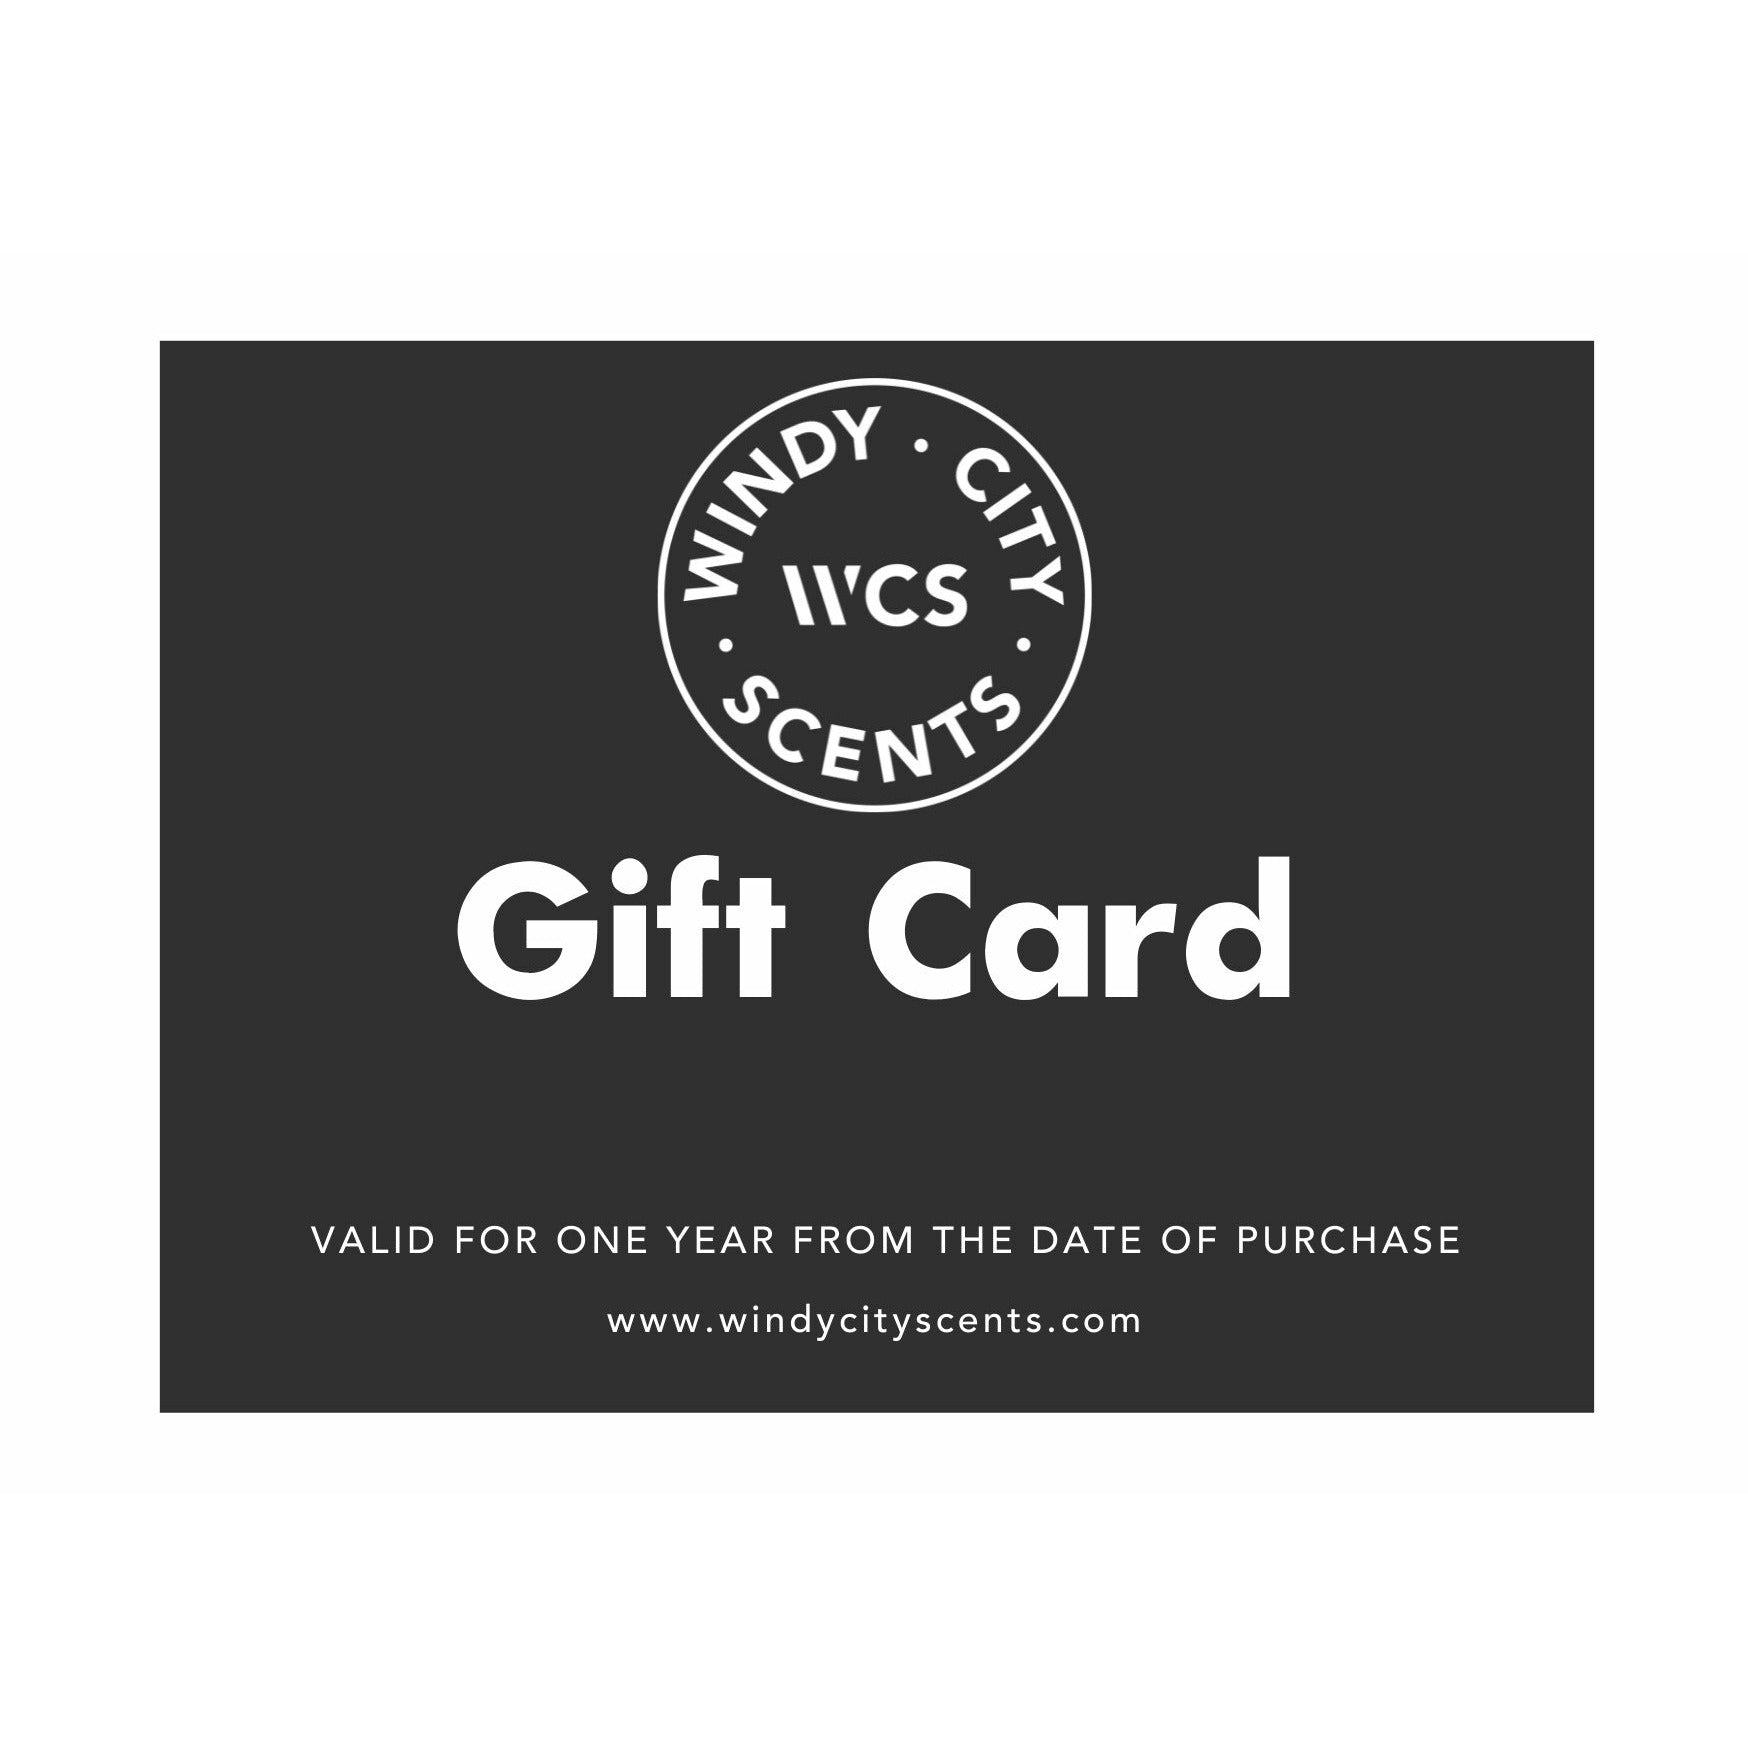 Windy City Scents Gift Card